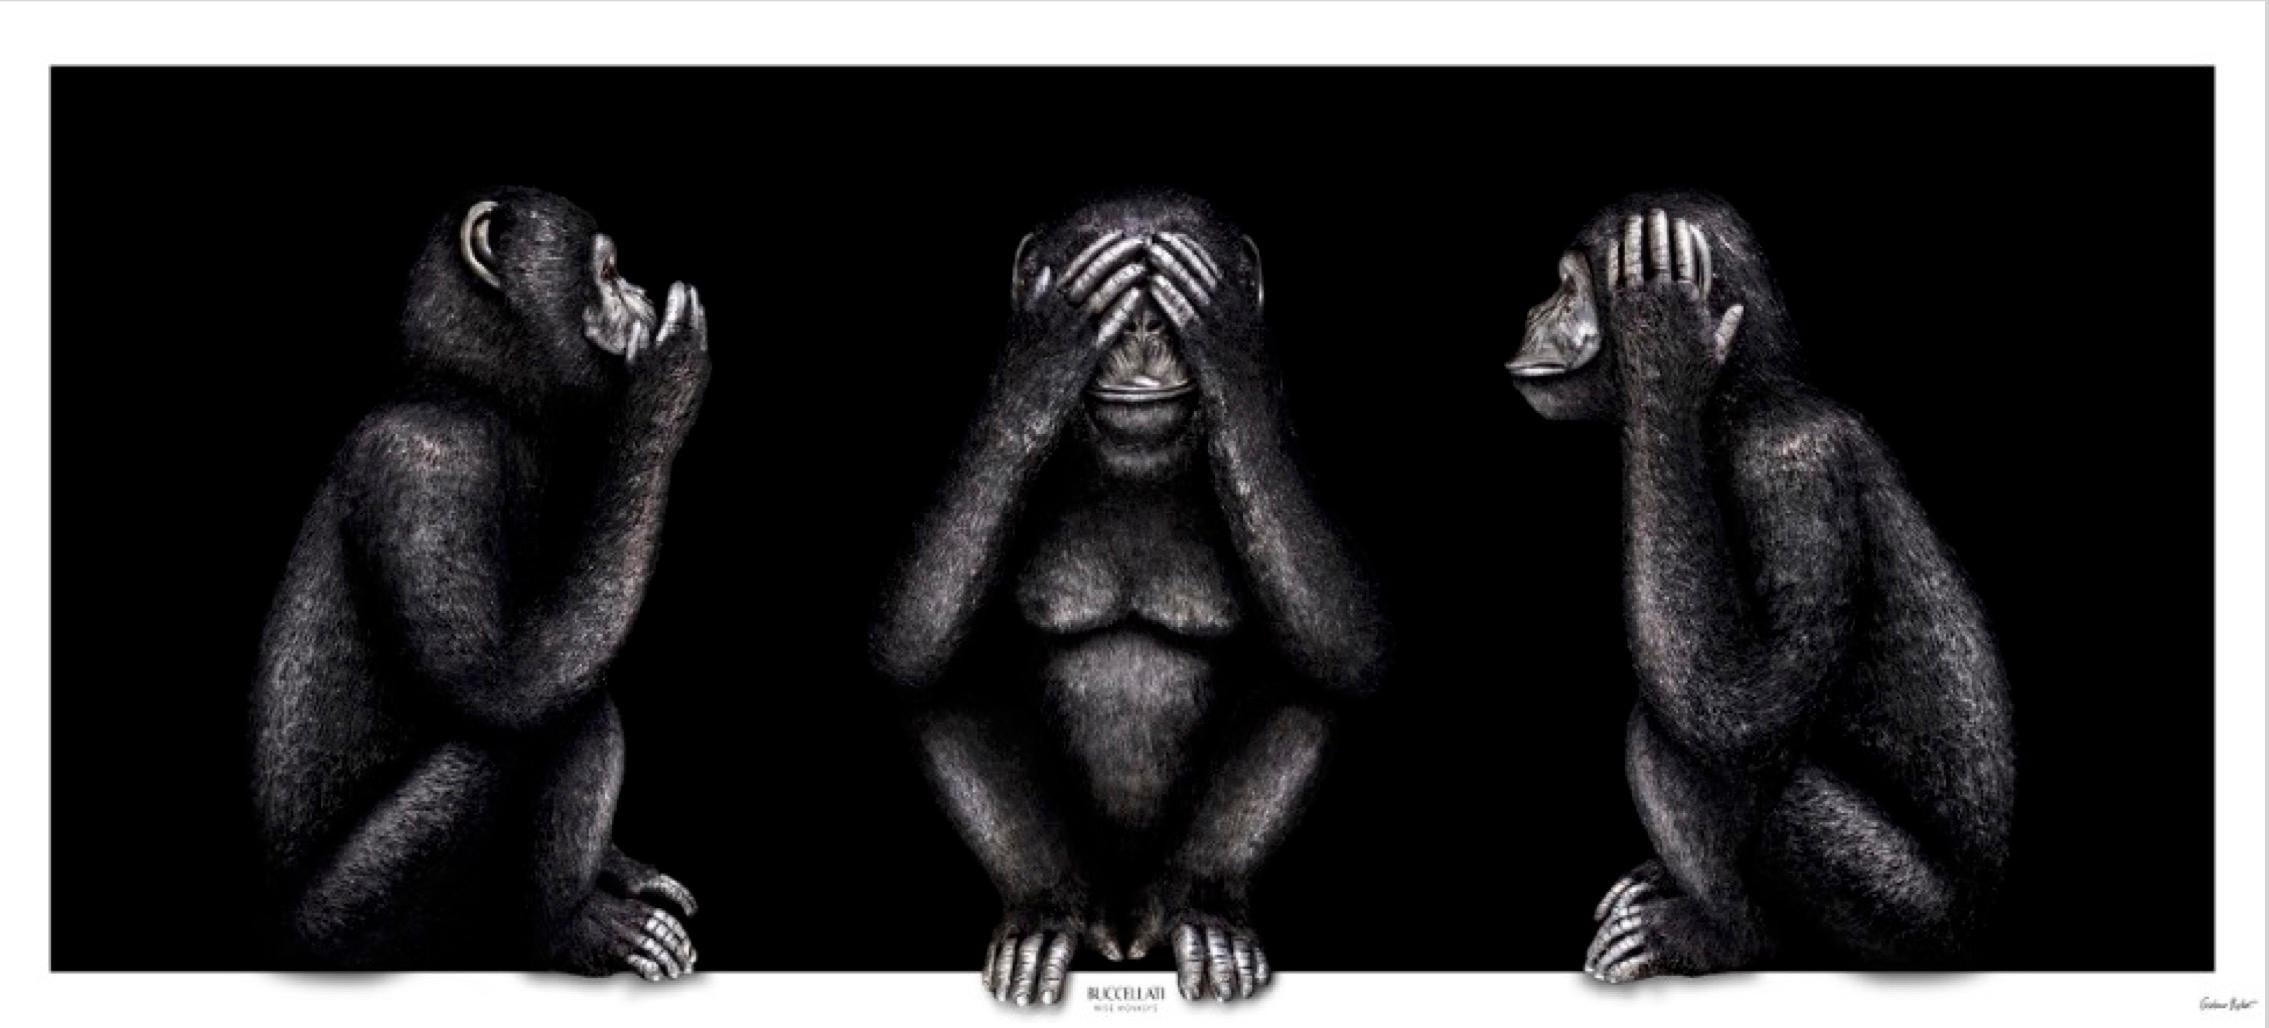 "BWM-S2" Photography 23" x 49" inch Edition 1/4 by Giuliano Bekor

Original fine art photography by Giuliano Bekor
Signed and numbered by the artist


Series: Buccellati Wise Monkey
Title: Buccellati Wise Monkey BWM-S2
Year: 2021
Print size: 22" x